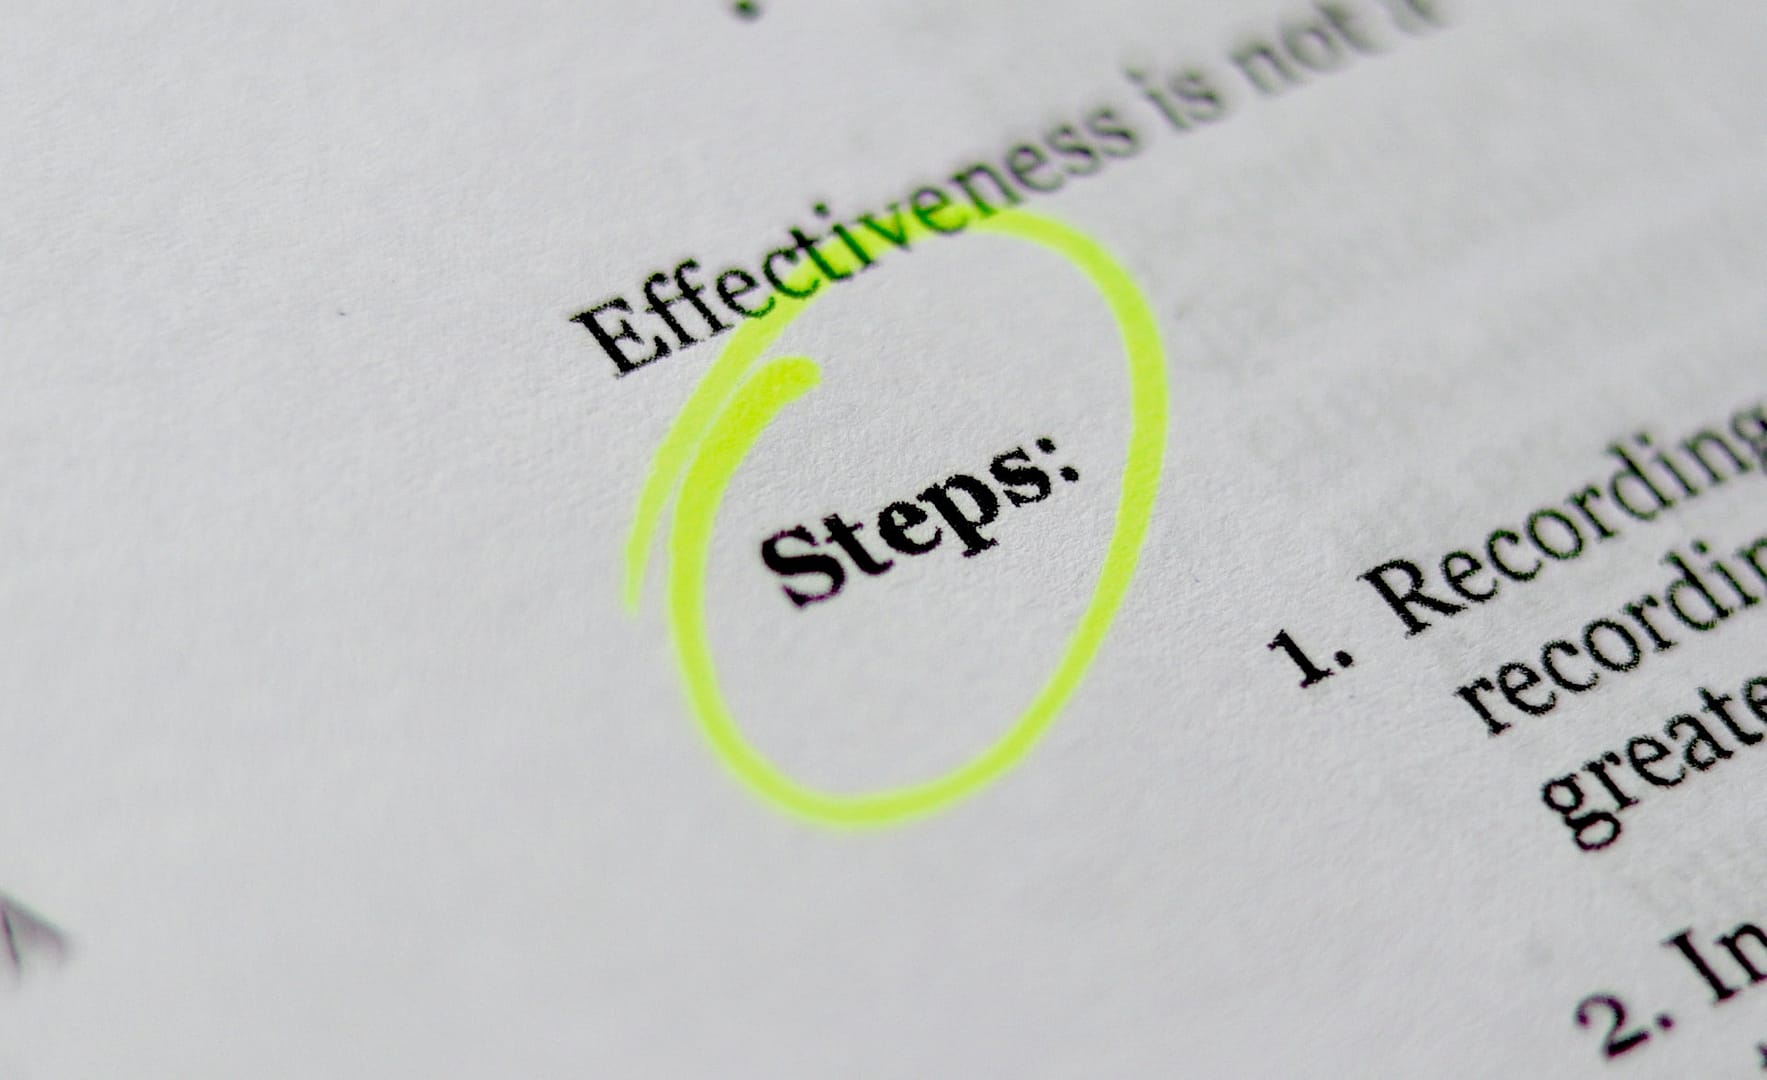 A paper highlighting the word 'steps' in yellow highlighter